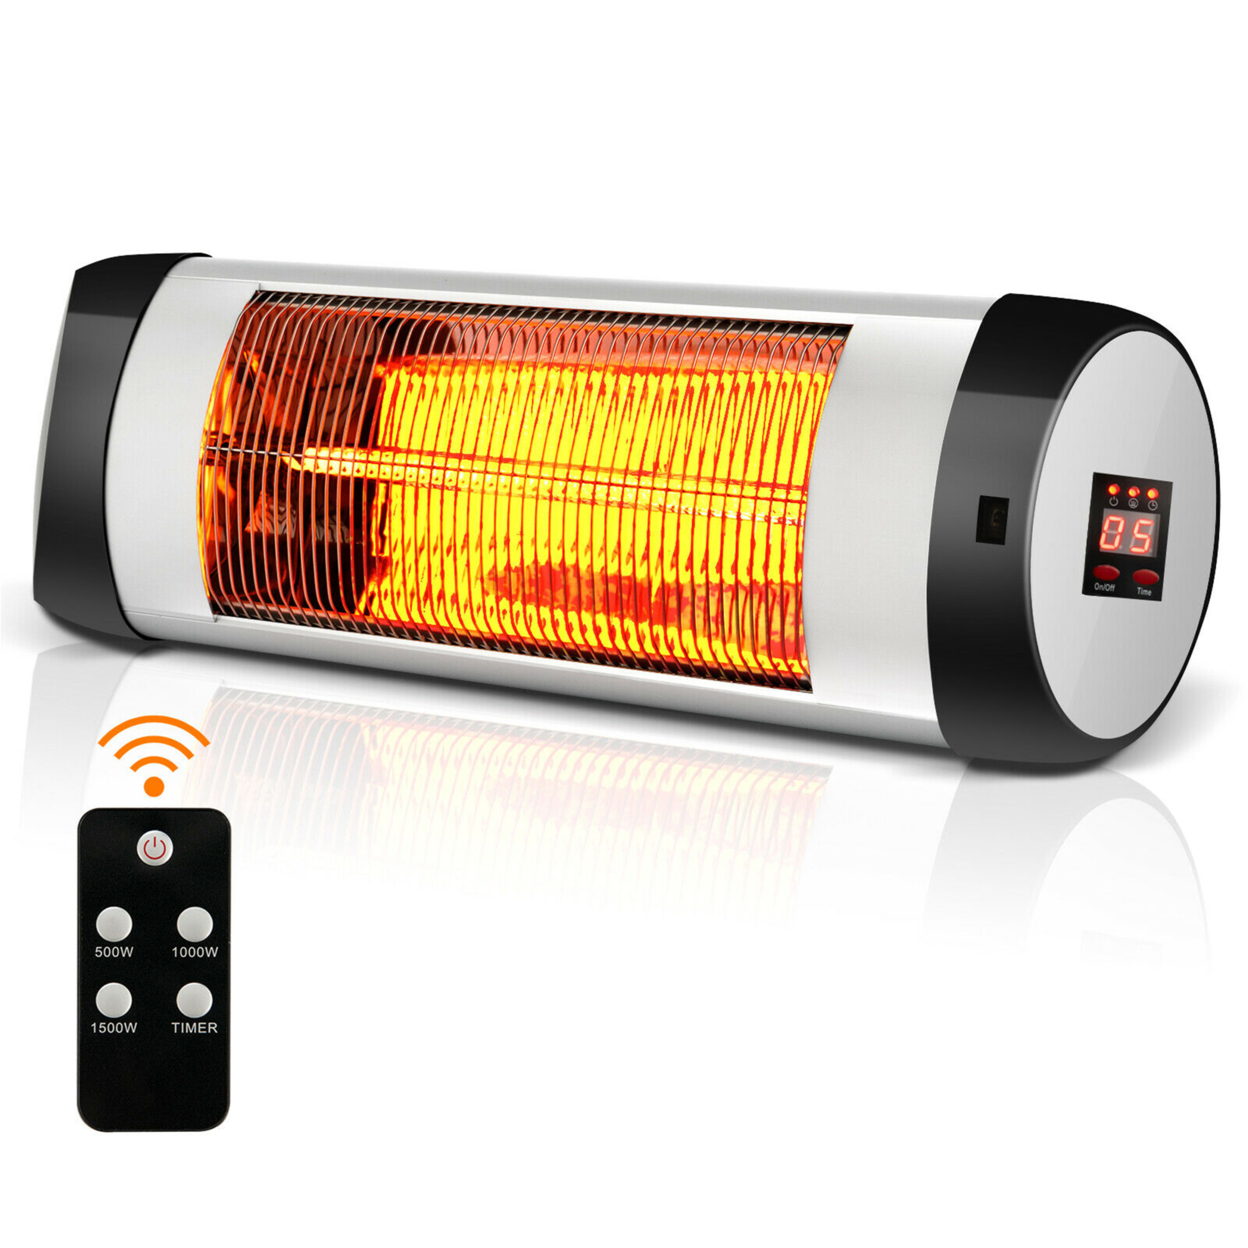 Wall-Mounted Electric Heater Patio Infrared Heater W/ Remote Control